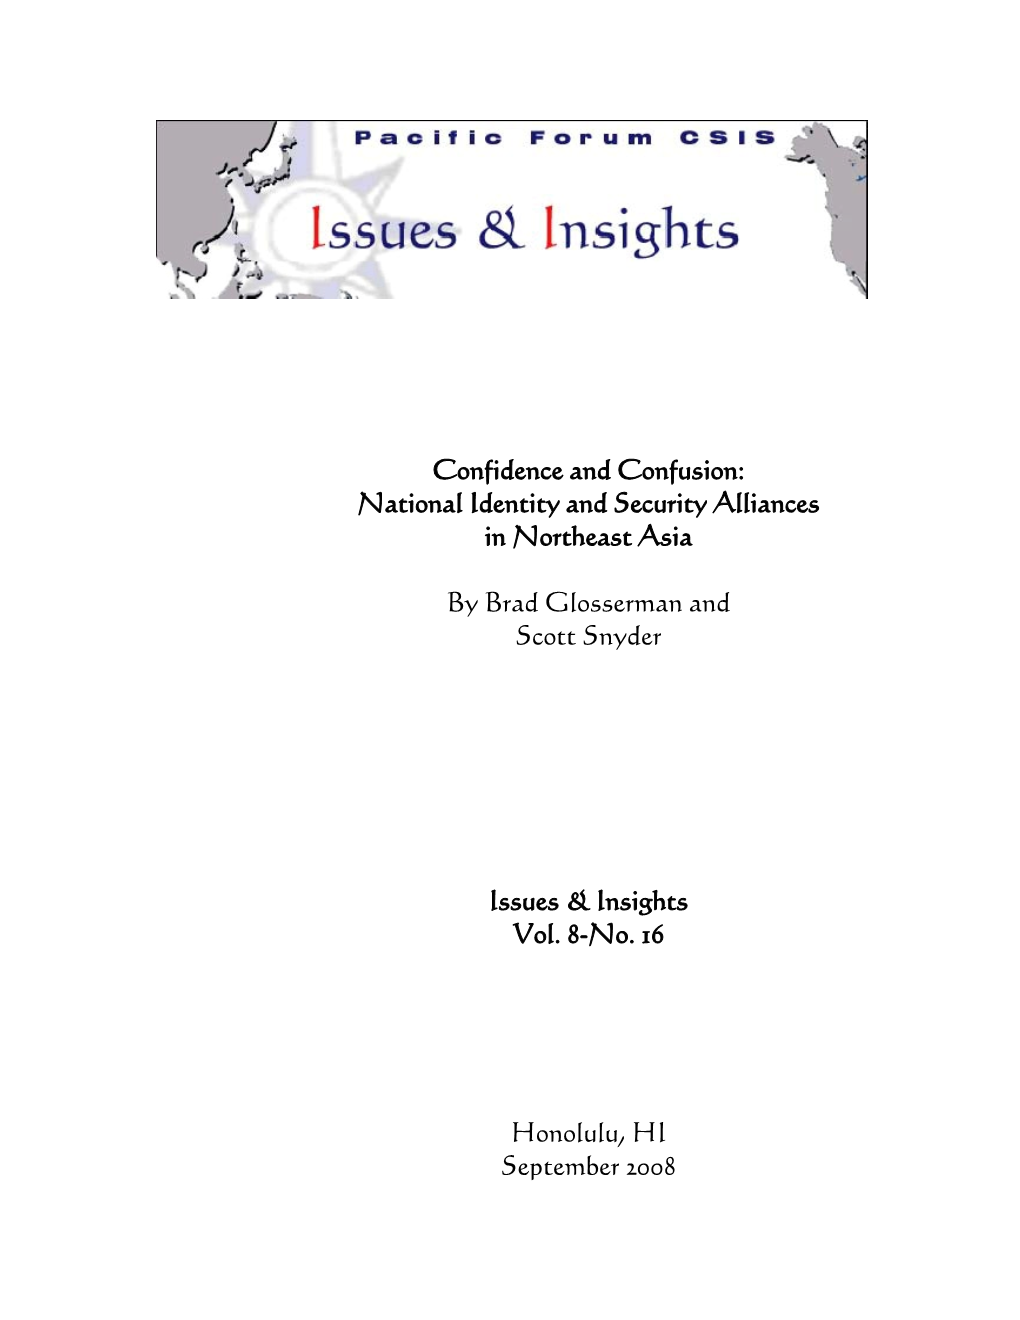 Confidence and Confusion: National Identity and Security Alliances in Northeast Asia